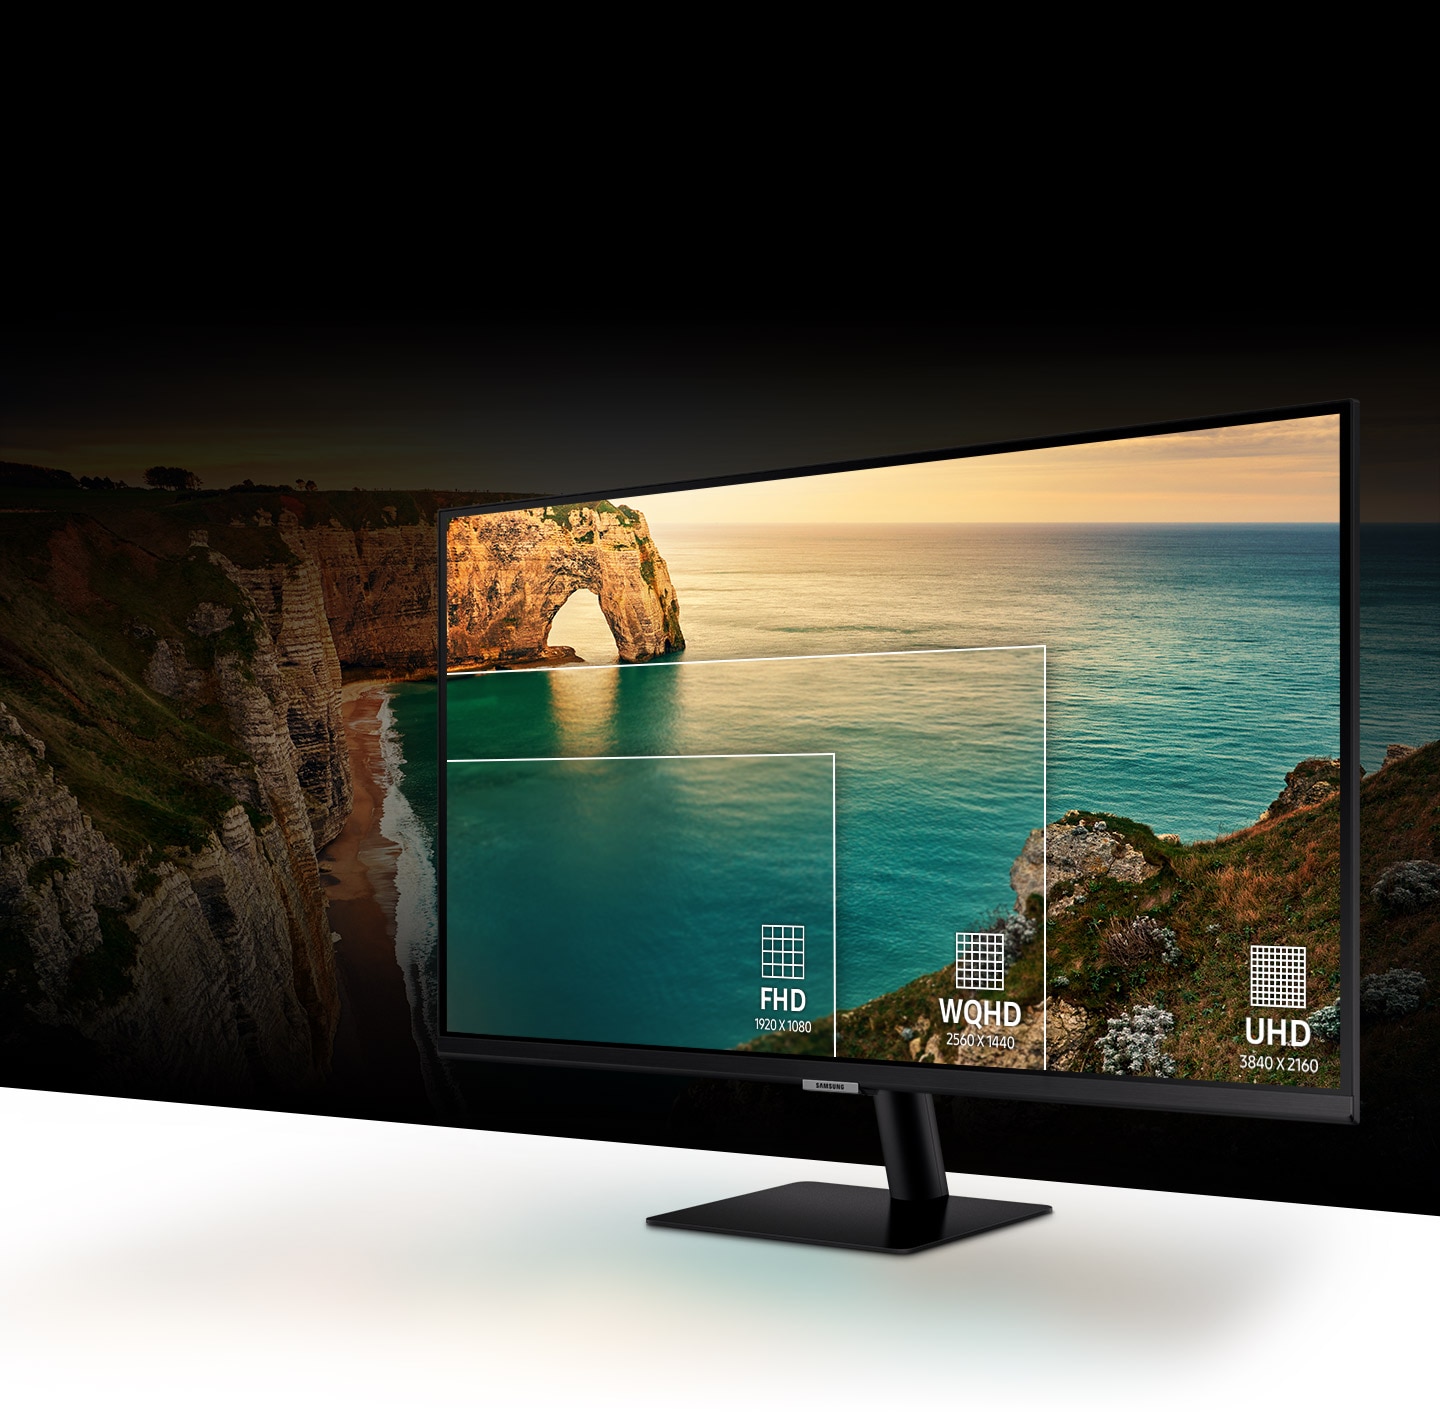 A 32 inch Smart Samsung M7 Monitor with graphics of the FHD 1920 x 1080 resolution, WQHD 2560 x 1440 resolution, and UHD 3840 x 2160 resolution imposed to show the M7 Monitor's highly pixelated cinematic UHD 4k picture quality.